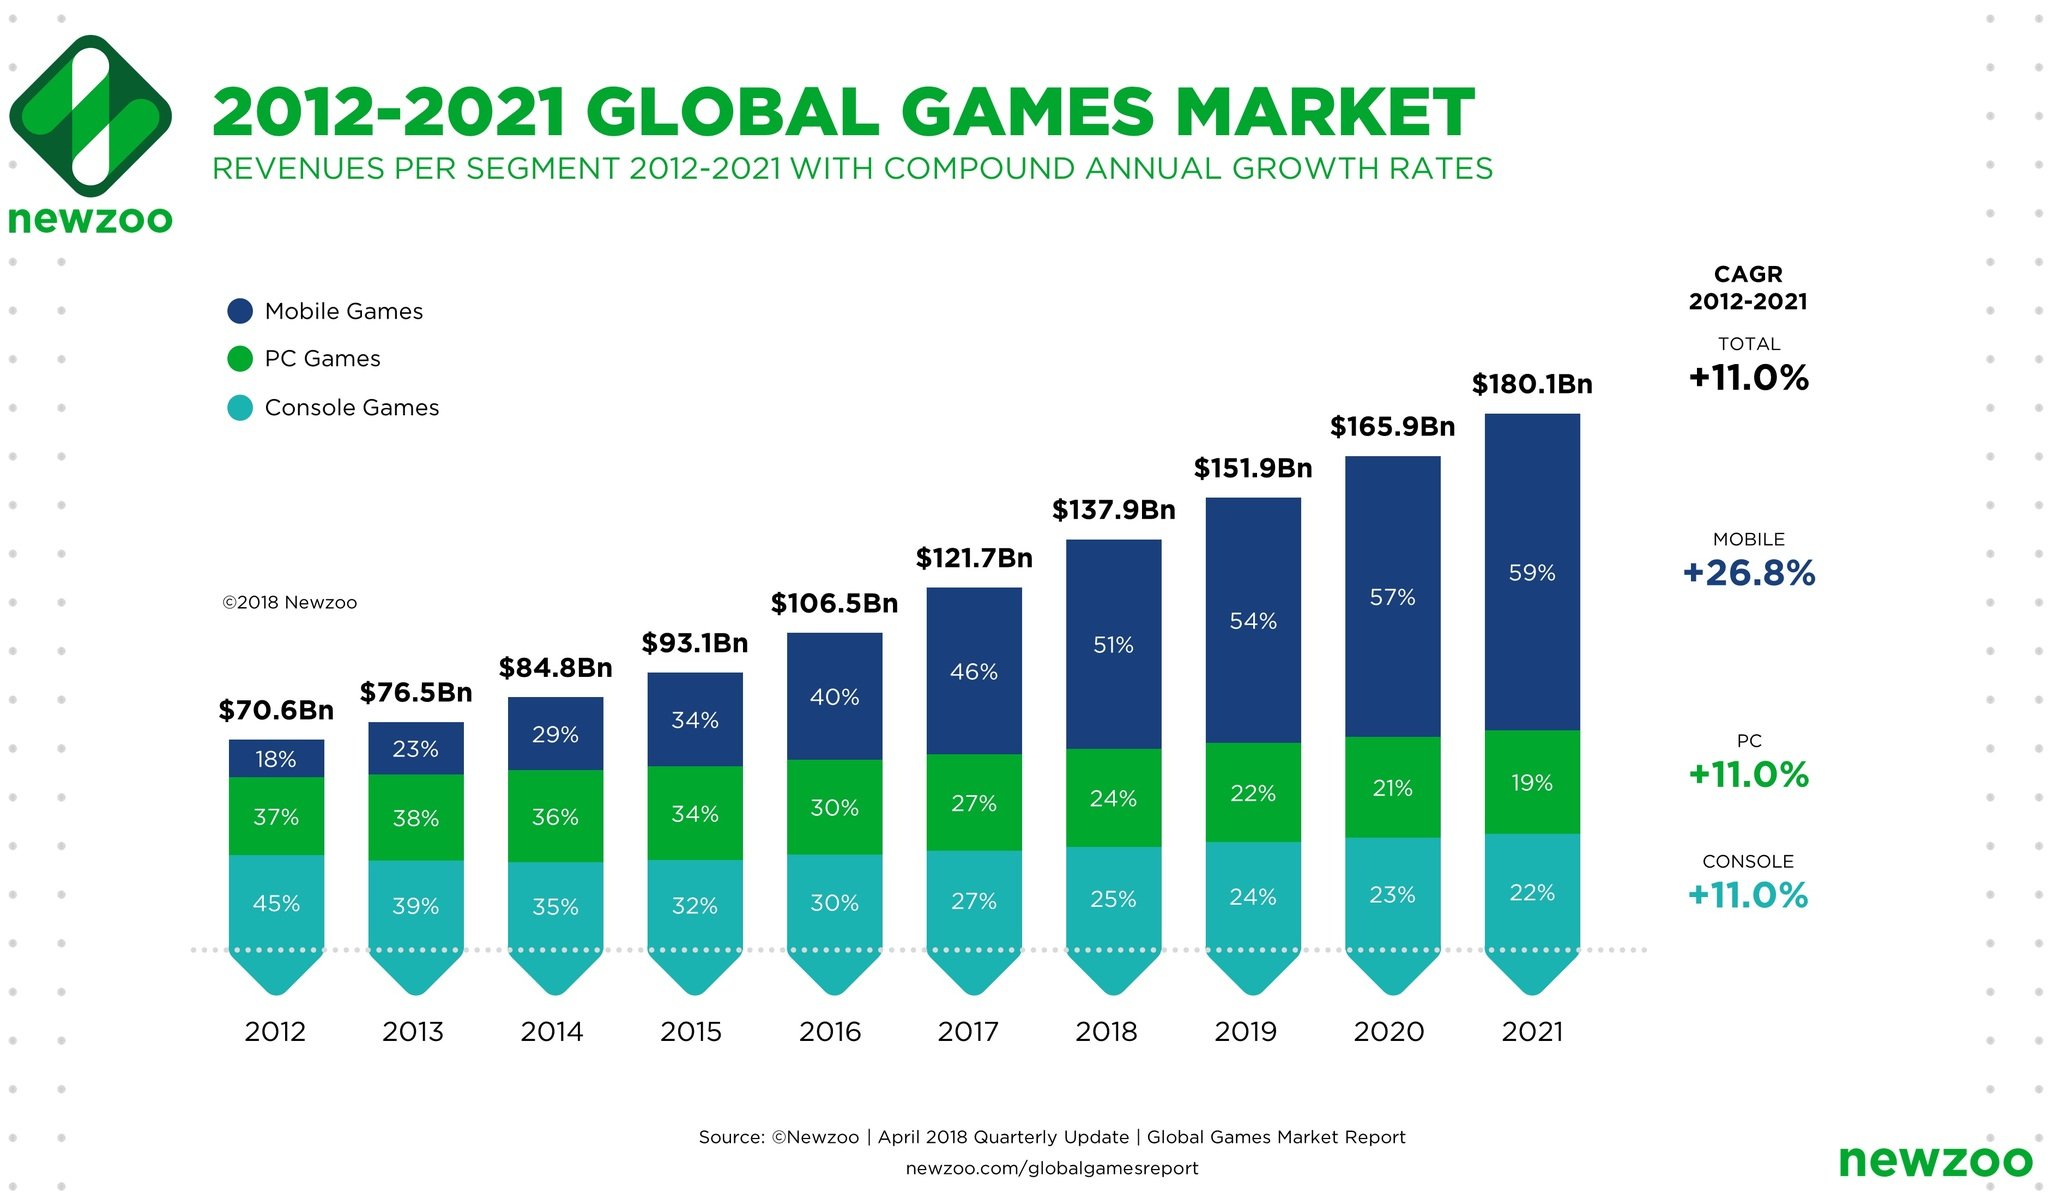 Newzoo mobile games market share